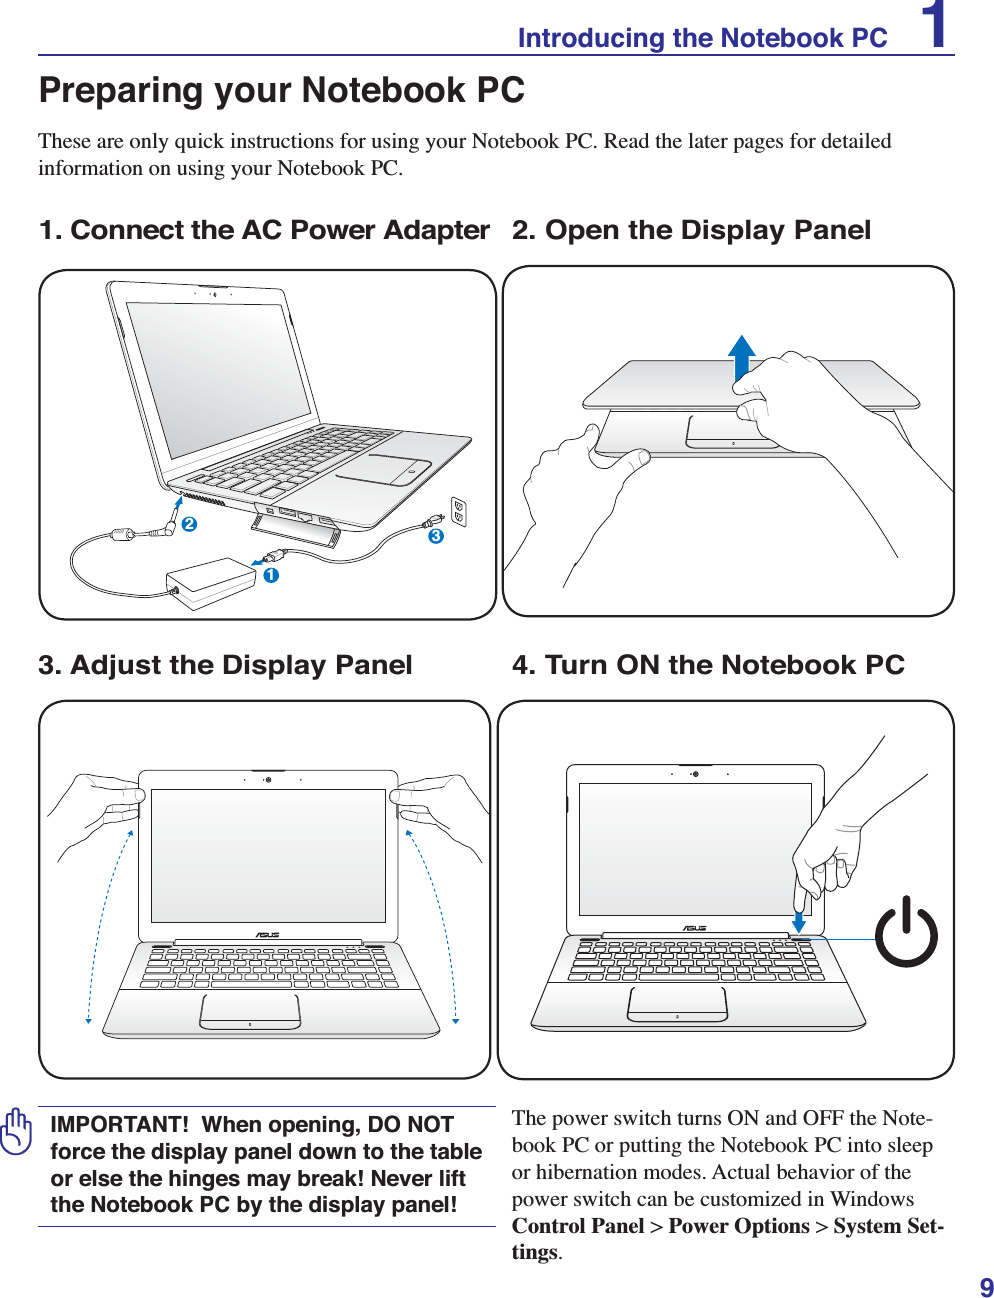 9Preparing your Notebook PCThese are only quick instructions for using your Notebook PC. Read the later pages for detailed information on using your Notebook PC.1. Connect the AC Power AdapterIMPORTANT!  When opening, DO NOT force the display panel down to the table or else the hinges may break! Never lift the Notebook PC by the display panel!3. Adjust the Display Panel 4. Turn ON the Notebook PCThe power switch turns ON and OFF the Note-book PC or putting the Notebook PC into sleep or hibernation modes. Actual behavior of the power switch can be customized in Windows Control Panel &gt; Power Options &gt; System Set-tings. 123Introducing the Notebook PC    12. Open the Display Panel